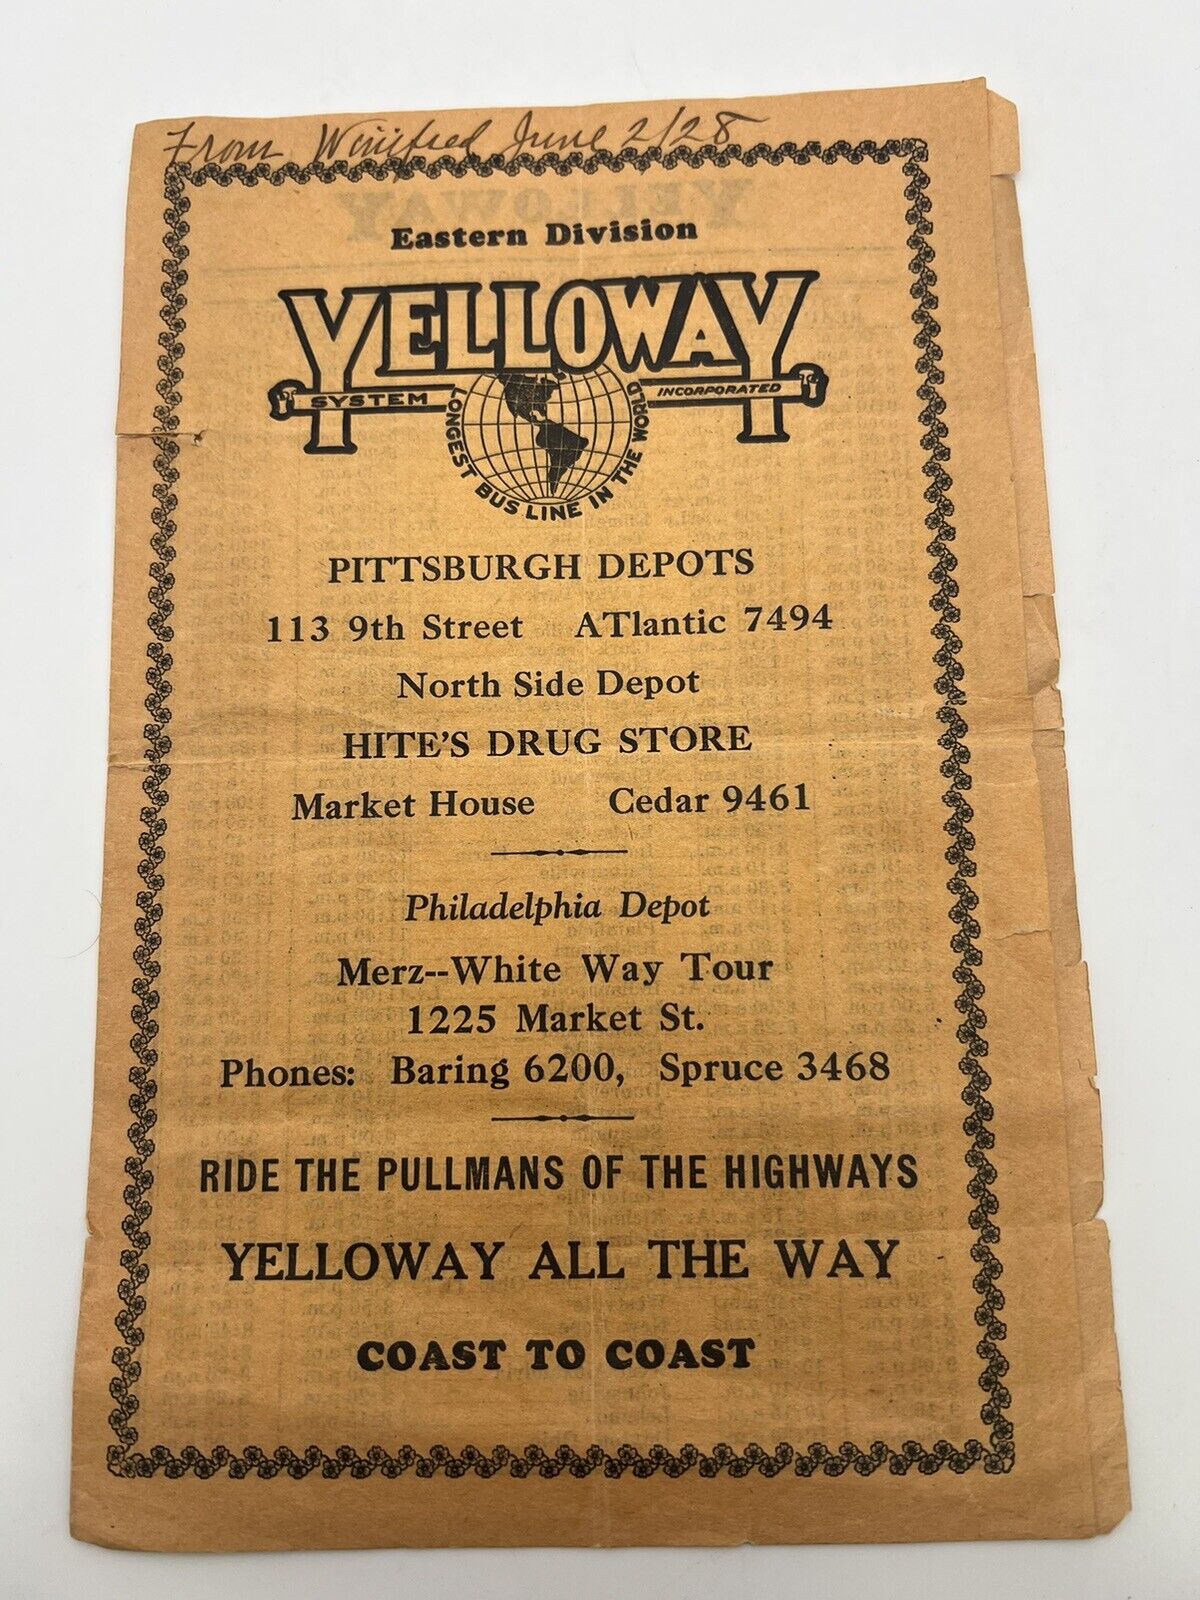 Antique 1928 Yelloway Eastern Division Pittsburgh Depot Bus Schedule